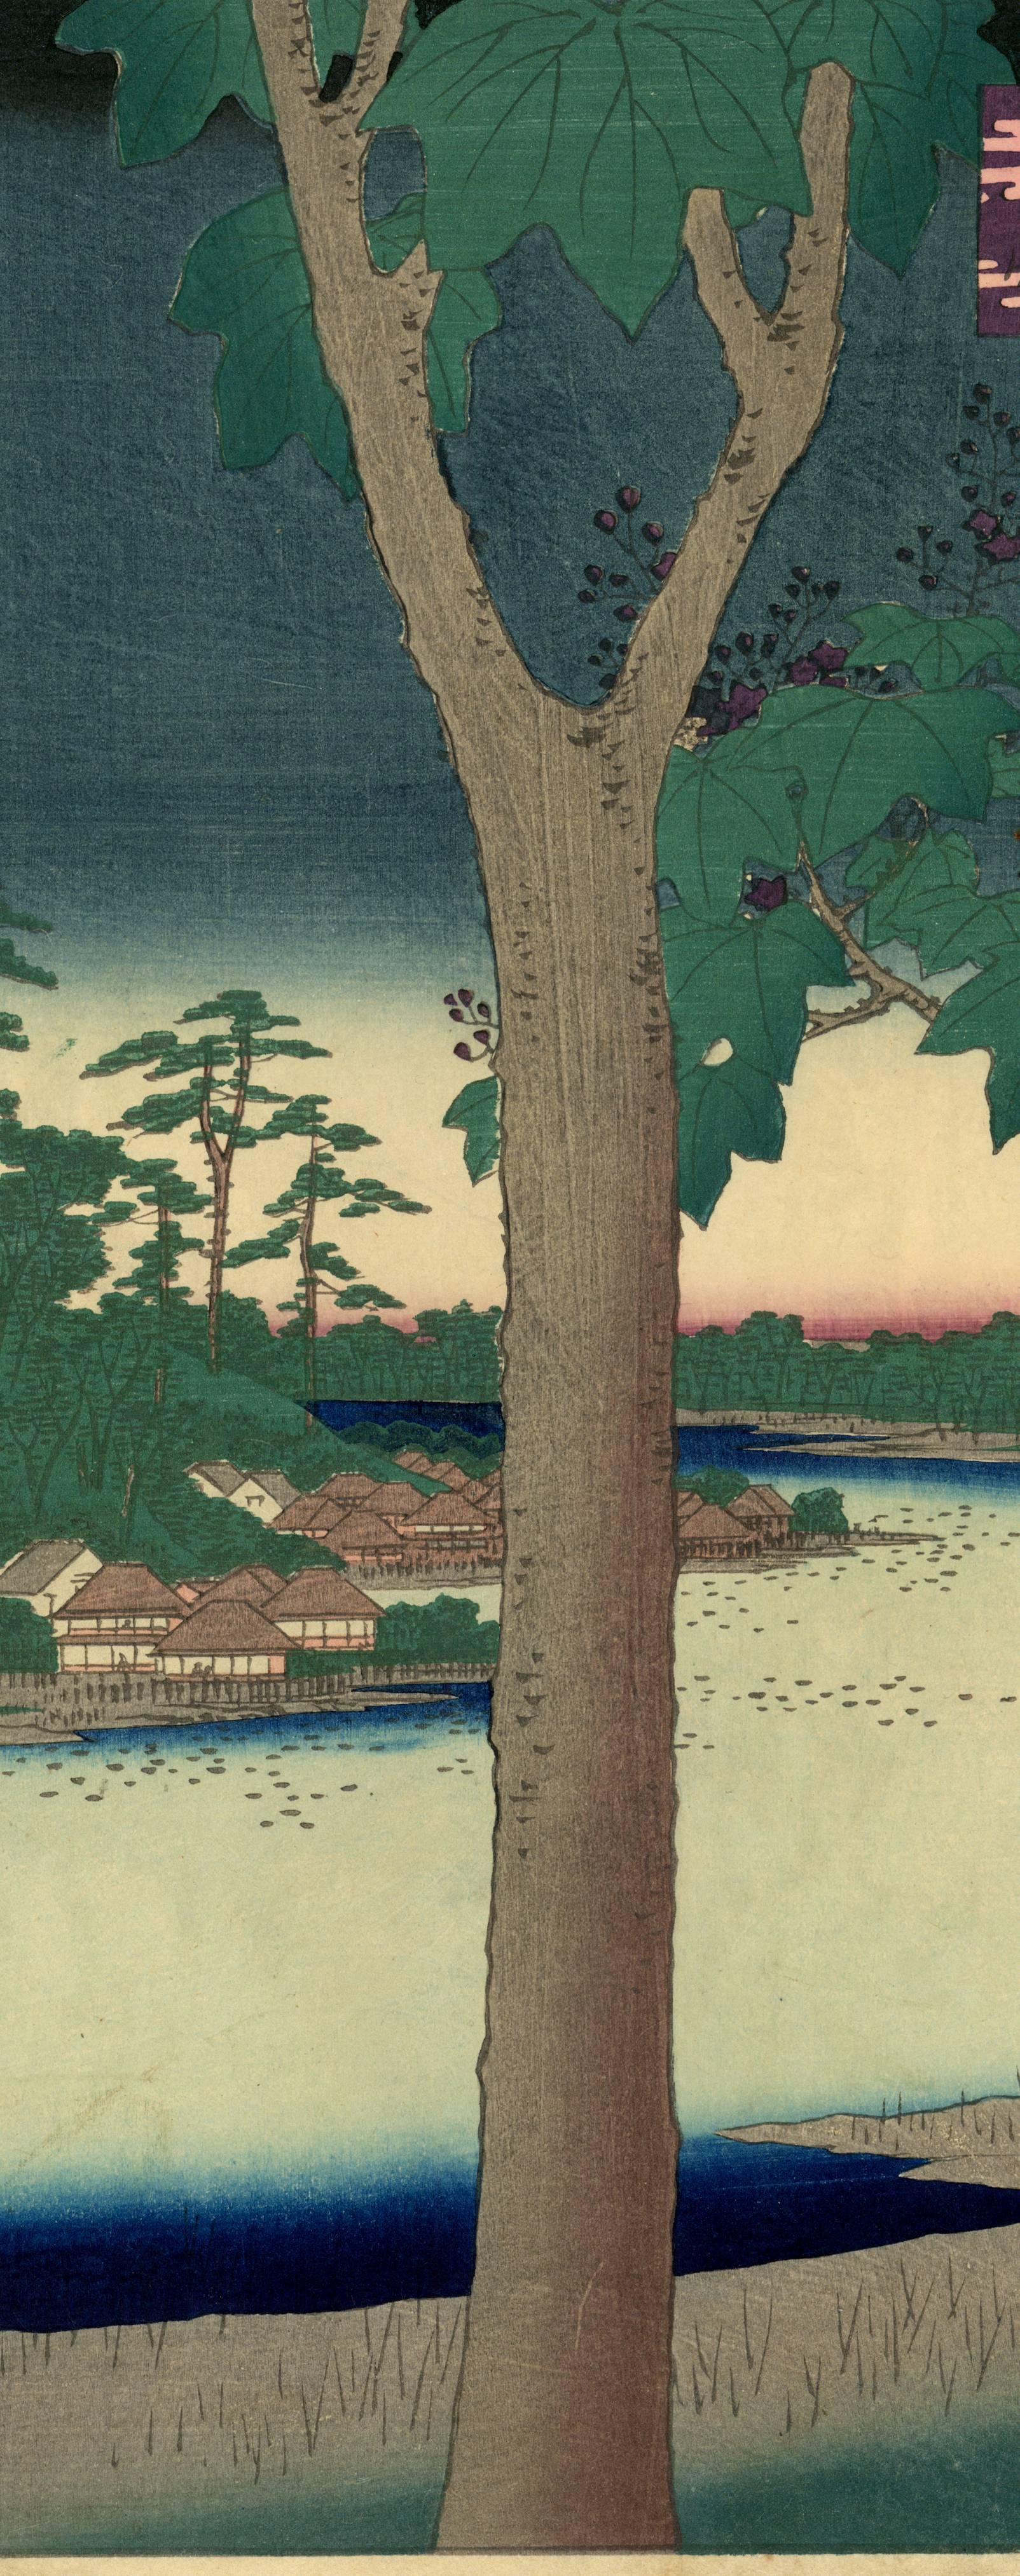 Original Japanese color woodblock print. The truncated trunk of a beautiful paulownia tree dominates this view near the southern shore of Tameike, near Edo Castle. The name Kiribatake means “Paulownia Fields”. This design was later replaced by a